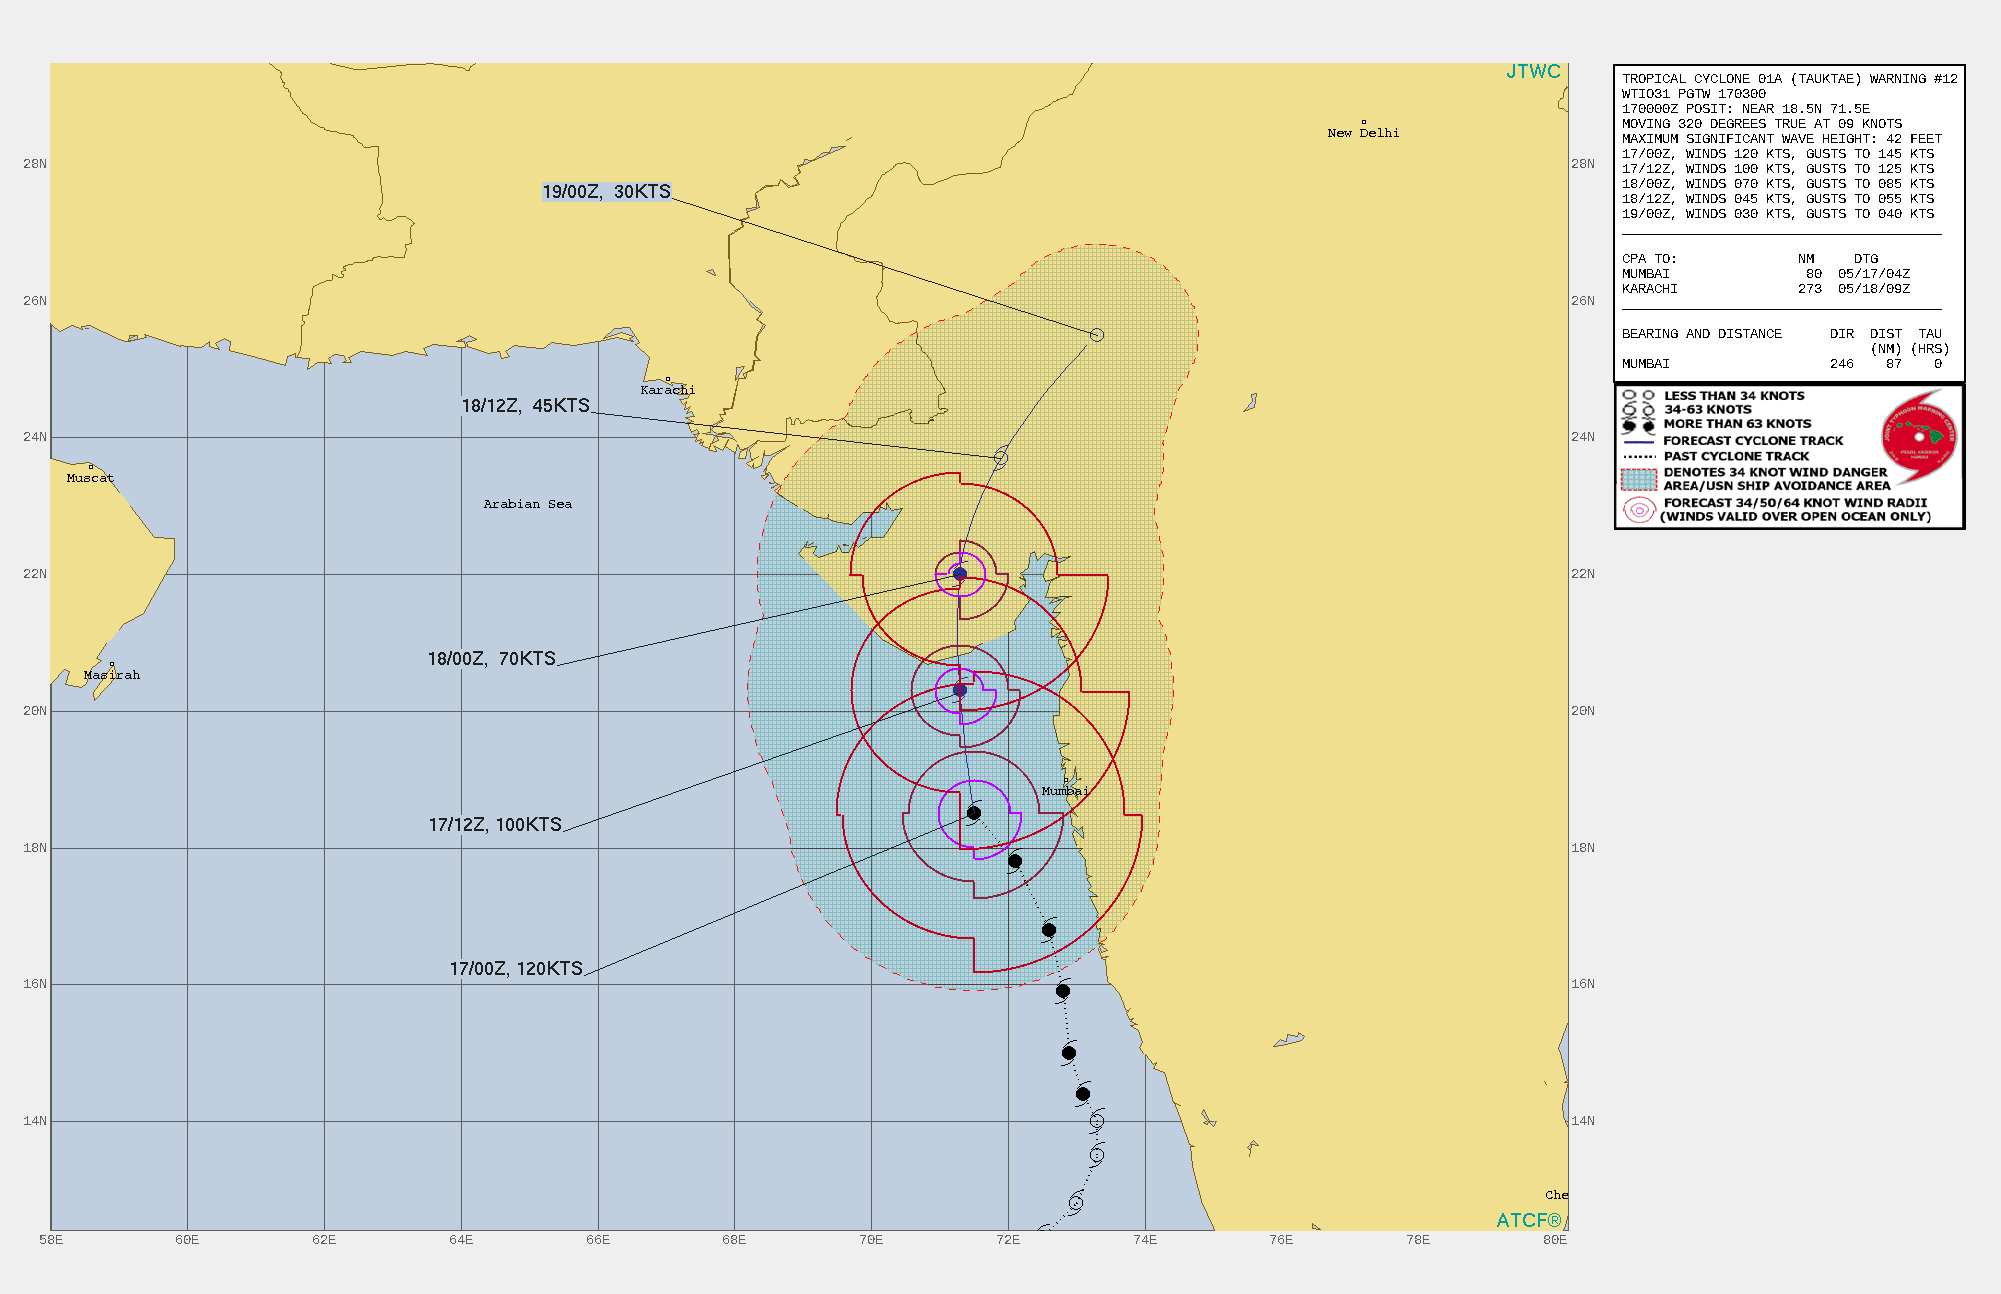 TC 01A. WARNING 12 ISSUED AT 17/03UTC.ANALYSIS INDICATES FAVORABLE ENVIRONMENTAL CONDITIONS WITH GOOD POLEWARD OUTFLOW, LOW  (10-15KTS) VERTICAL WIND SHEAR (VWS); AND WARM (30-31C) SEA SURFACE  TEMPERATURES (SST). TC 01A WILL CONTINUE ON ITS NORTHERLY CURRENT  TRACK ALONG THE WESTERN PERIPHERY OF A DEEP-LAYERED SUBTROPICAL  RIDGE TO THE EAST UNTIL IT MAKES LANDFALL NEAR JAFARABAD, INDIA BY  18H. THE SYSTEM IS EXPECTED TO DECREASE IN INTENSITY AS IT ENTERS  AN AREA OF GREATER VWS IN CONJUNCTION WITH TERRAIN INTERACTION AND  SLIGHTLY COOLER SST NEARSHORE AS IT TRACKS NORTH. AFTER LANDFALL,  THE CYCLONE WILL RAPIDLY ERODE AS IT TRACKS ACROSS THE RUGGED  TERRAIN, LEADING TO DISSIPATION BY 48H.